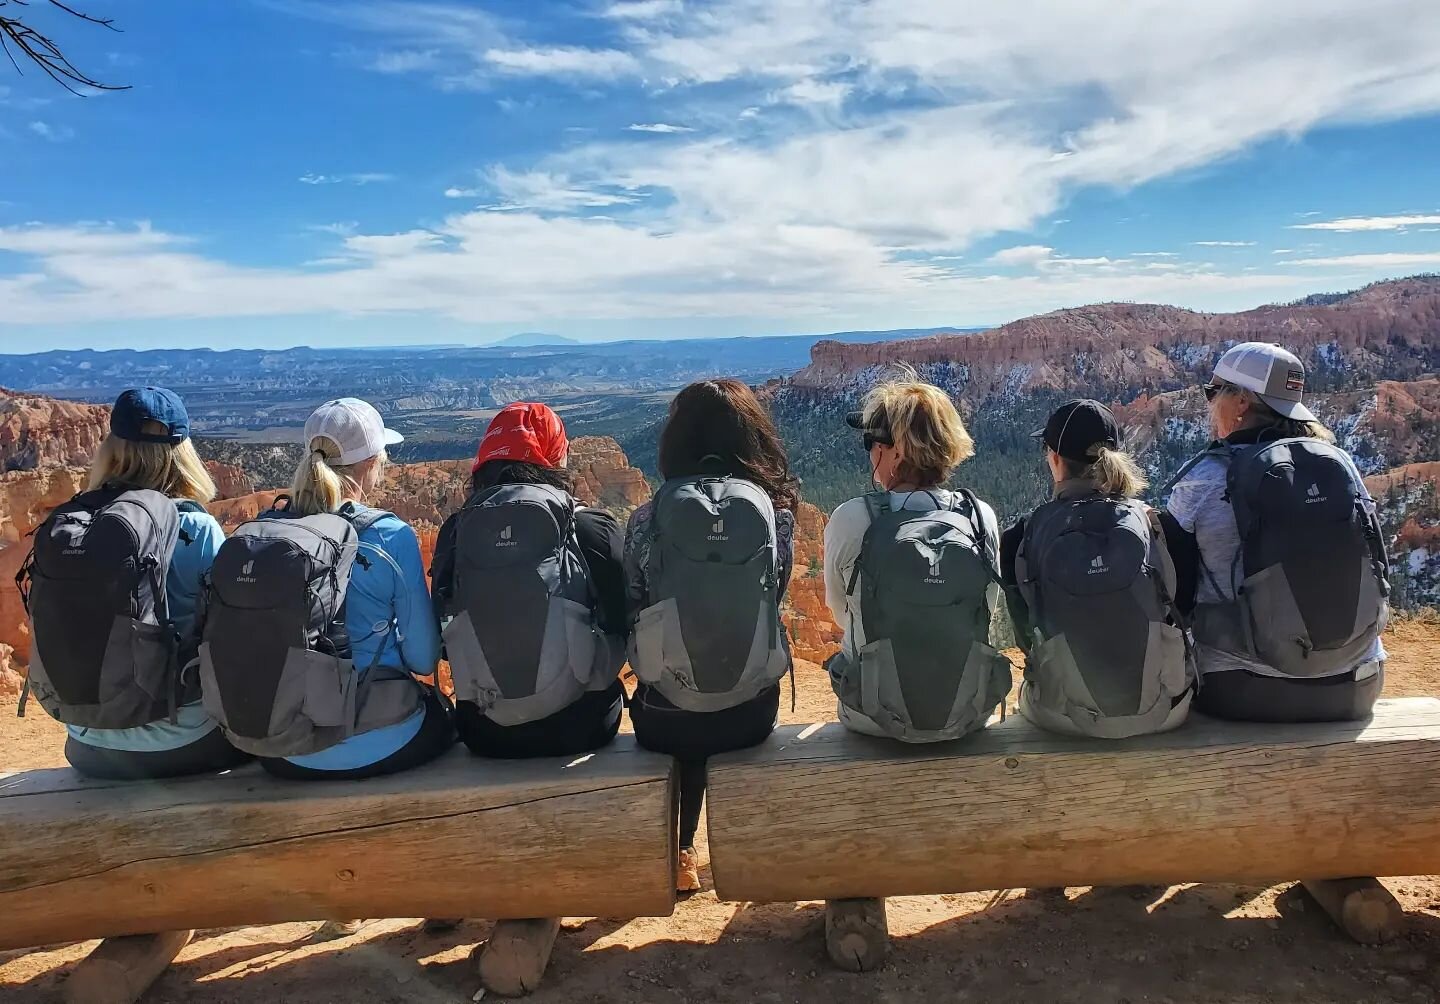 Happy Thanksgiving everyone!

What a memorable season of trips it has been. We are grateful for your support and looking forward to what our 2023 season will hold 🙏 🙌 

#outdoormavens #adventureconsulting #utahisrad #hike #camp #travelwithus #guide